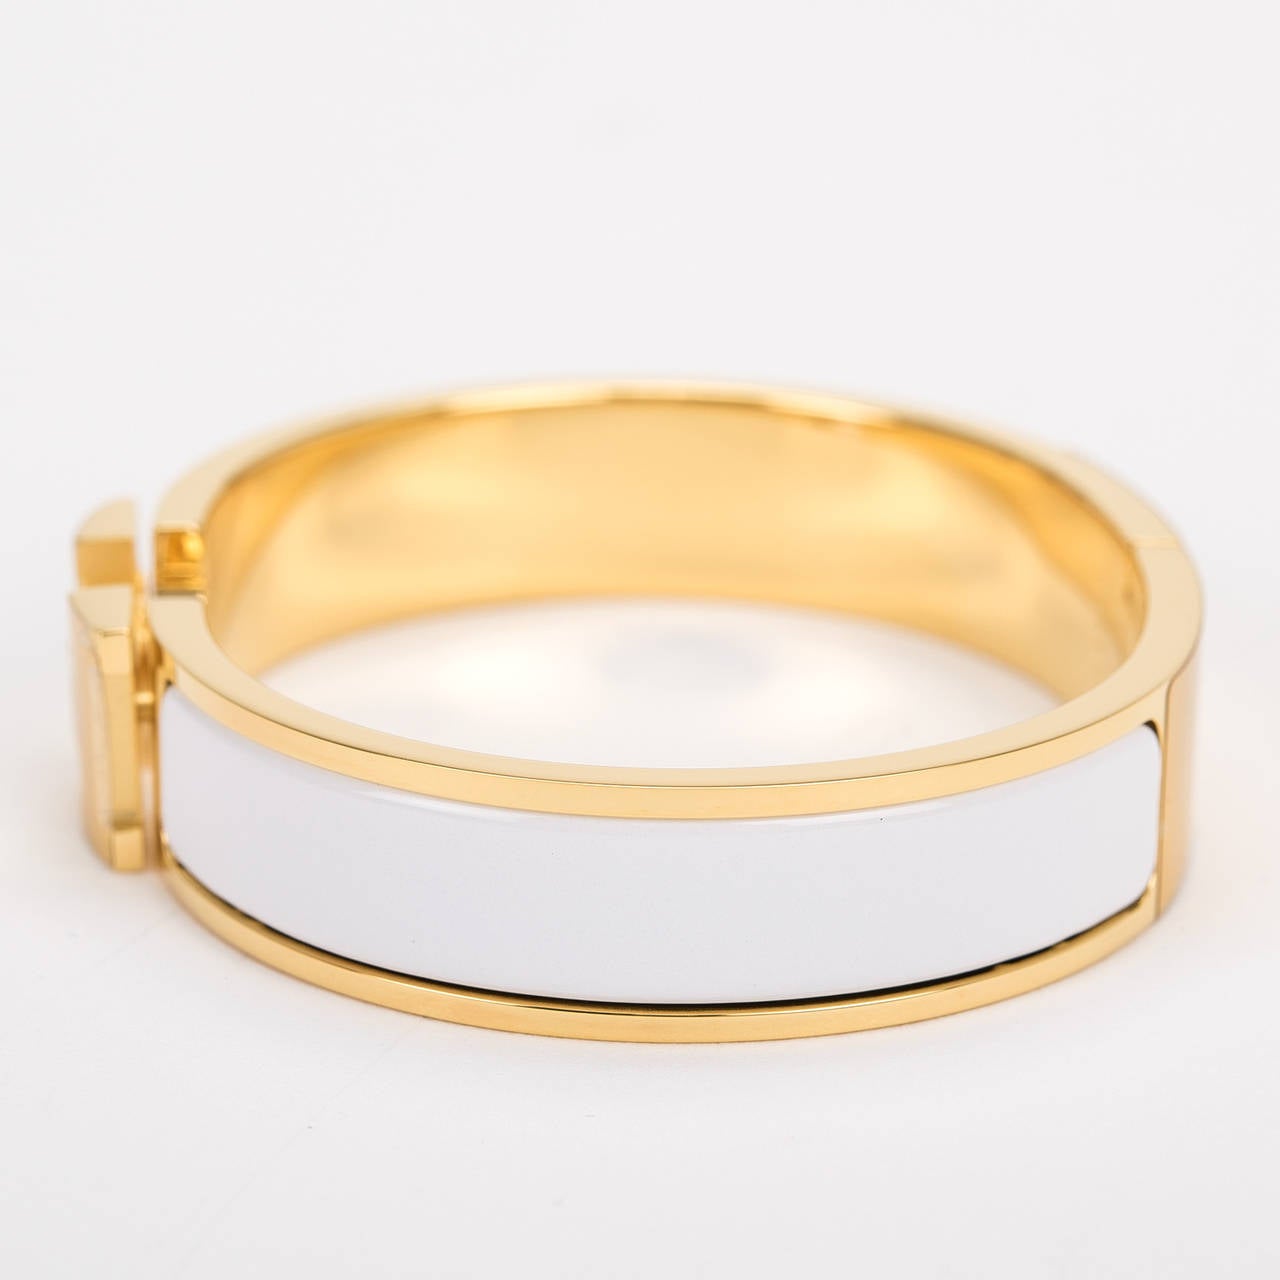 Hermes narrow Clic Clac H bracelet in White enamel with gold plated hardware in size PM.

Hermes is renowned for its enamel and leather bracelets. Hermes printed enamel bangles, enamel Clic Clac H bracelets, and leather/exotic Collier de Chien